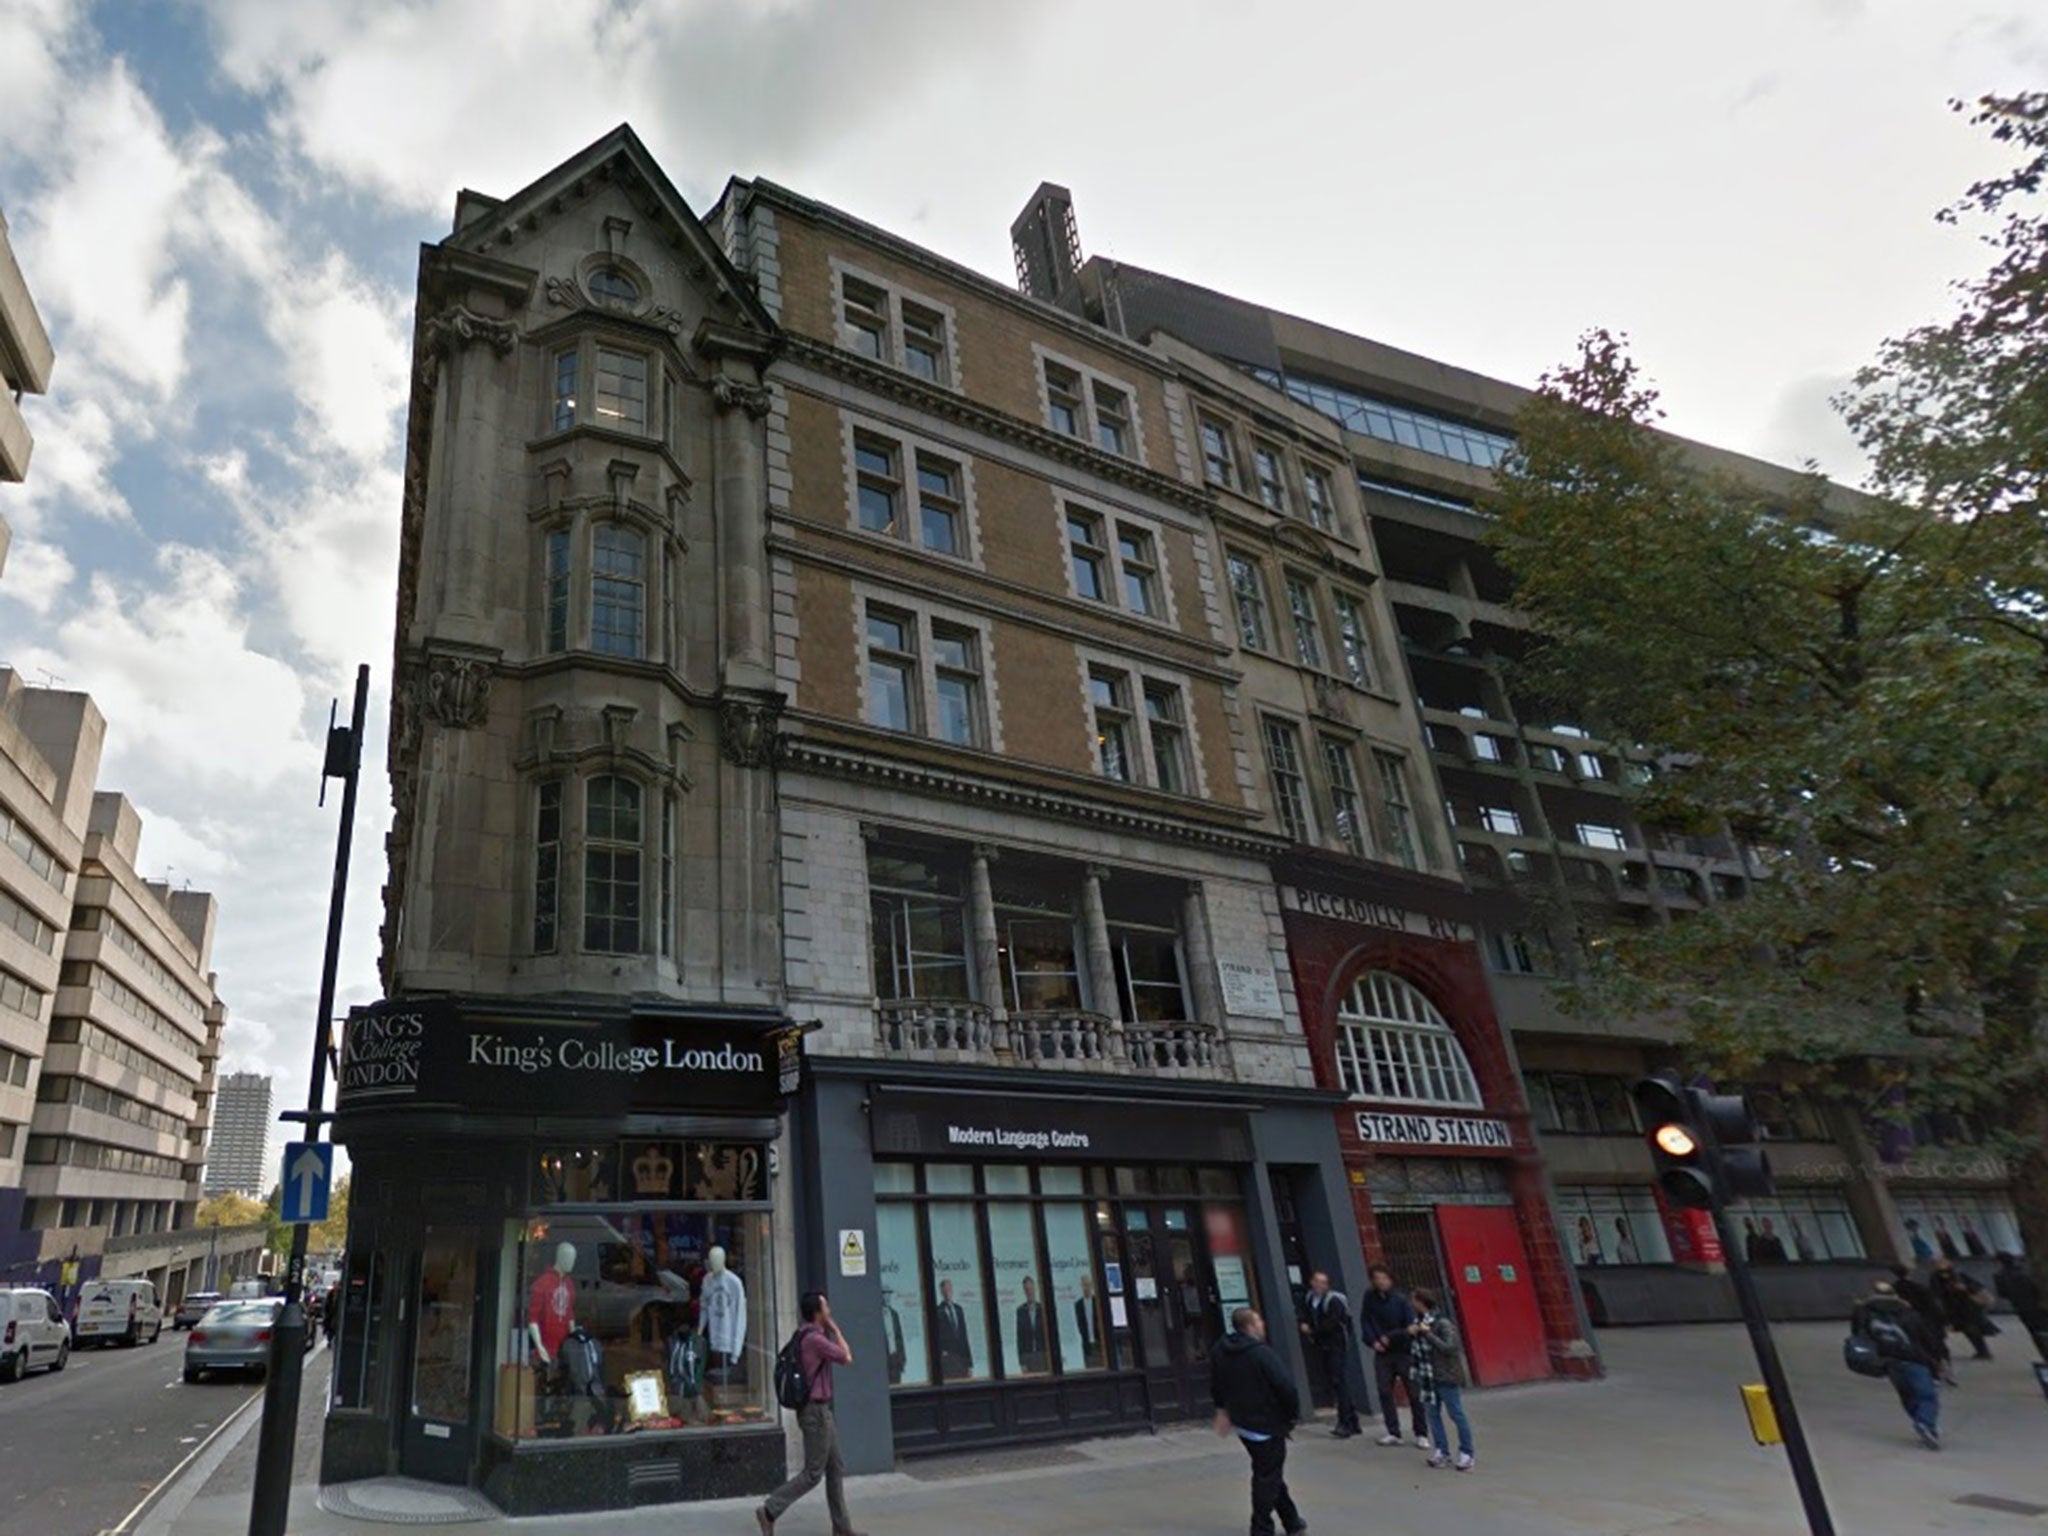 The alleged incident reportedly took place at King's College London's Strand campus